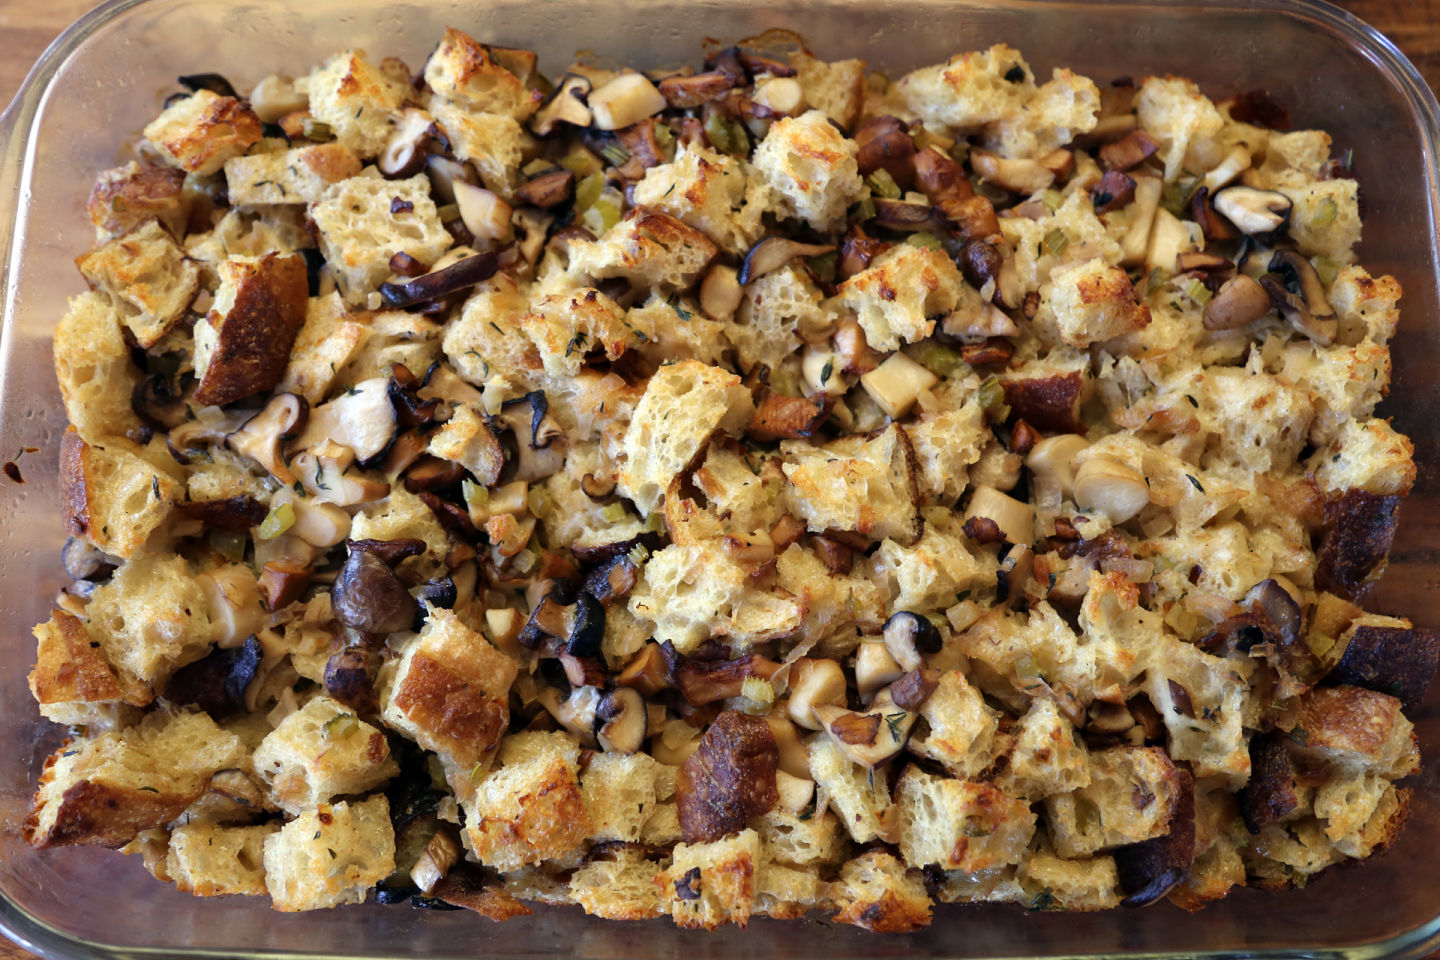 Wild Mushroom, Shallot, and Sourdough Stuffing with Herbs Wendy Goodfriend